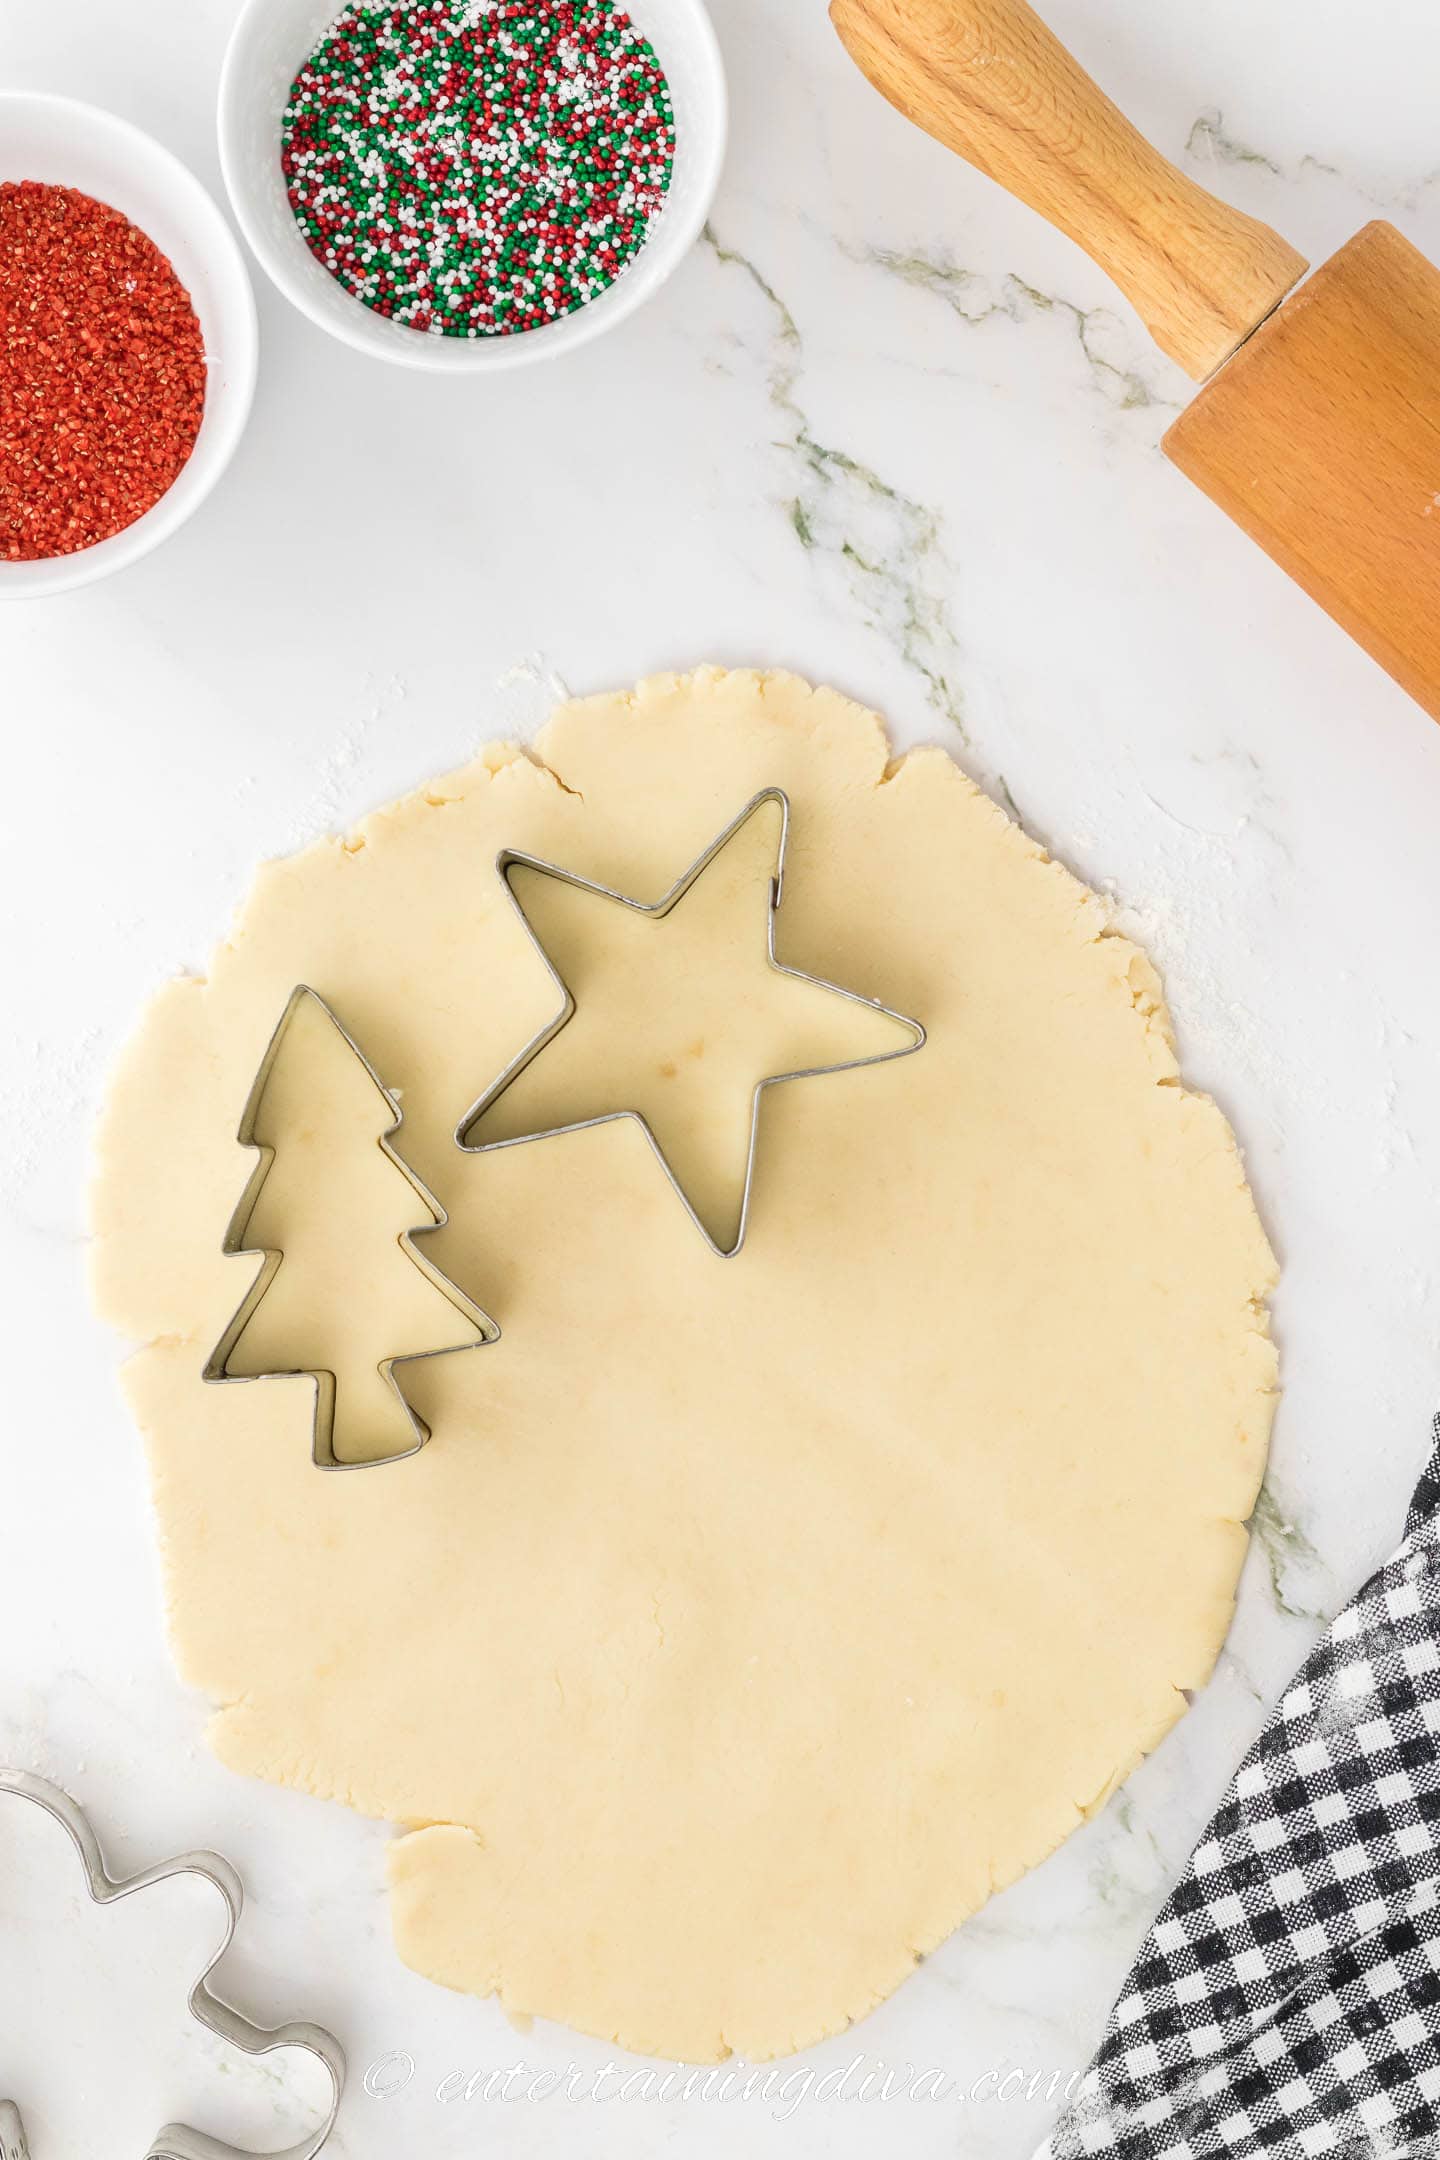 Shortbread cookie dough with Christmas tree and star cookie cutters